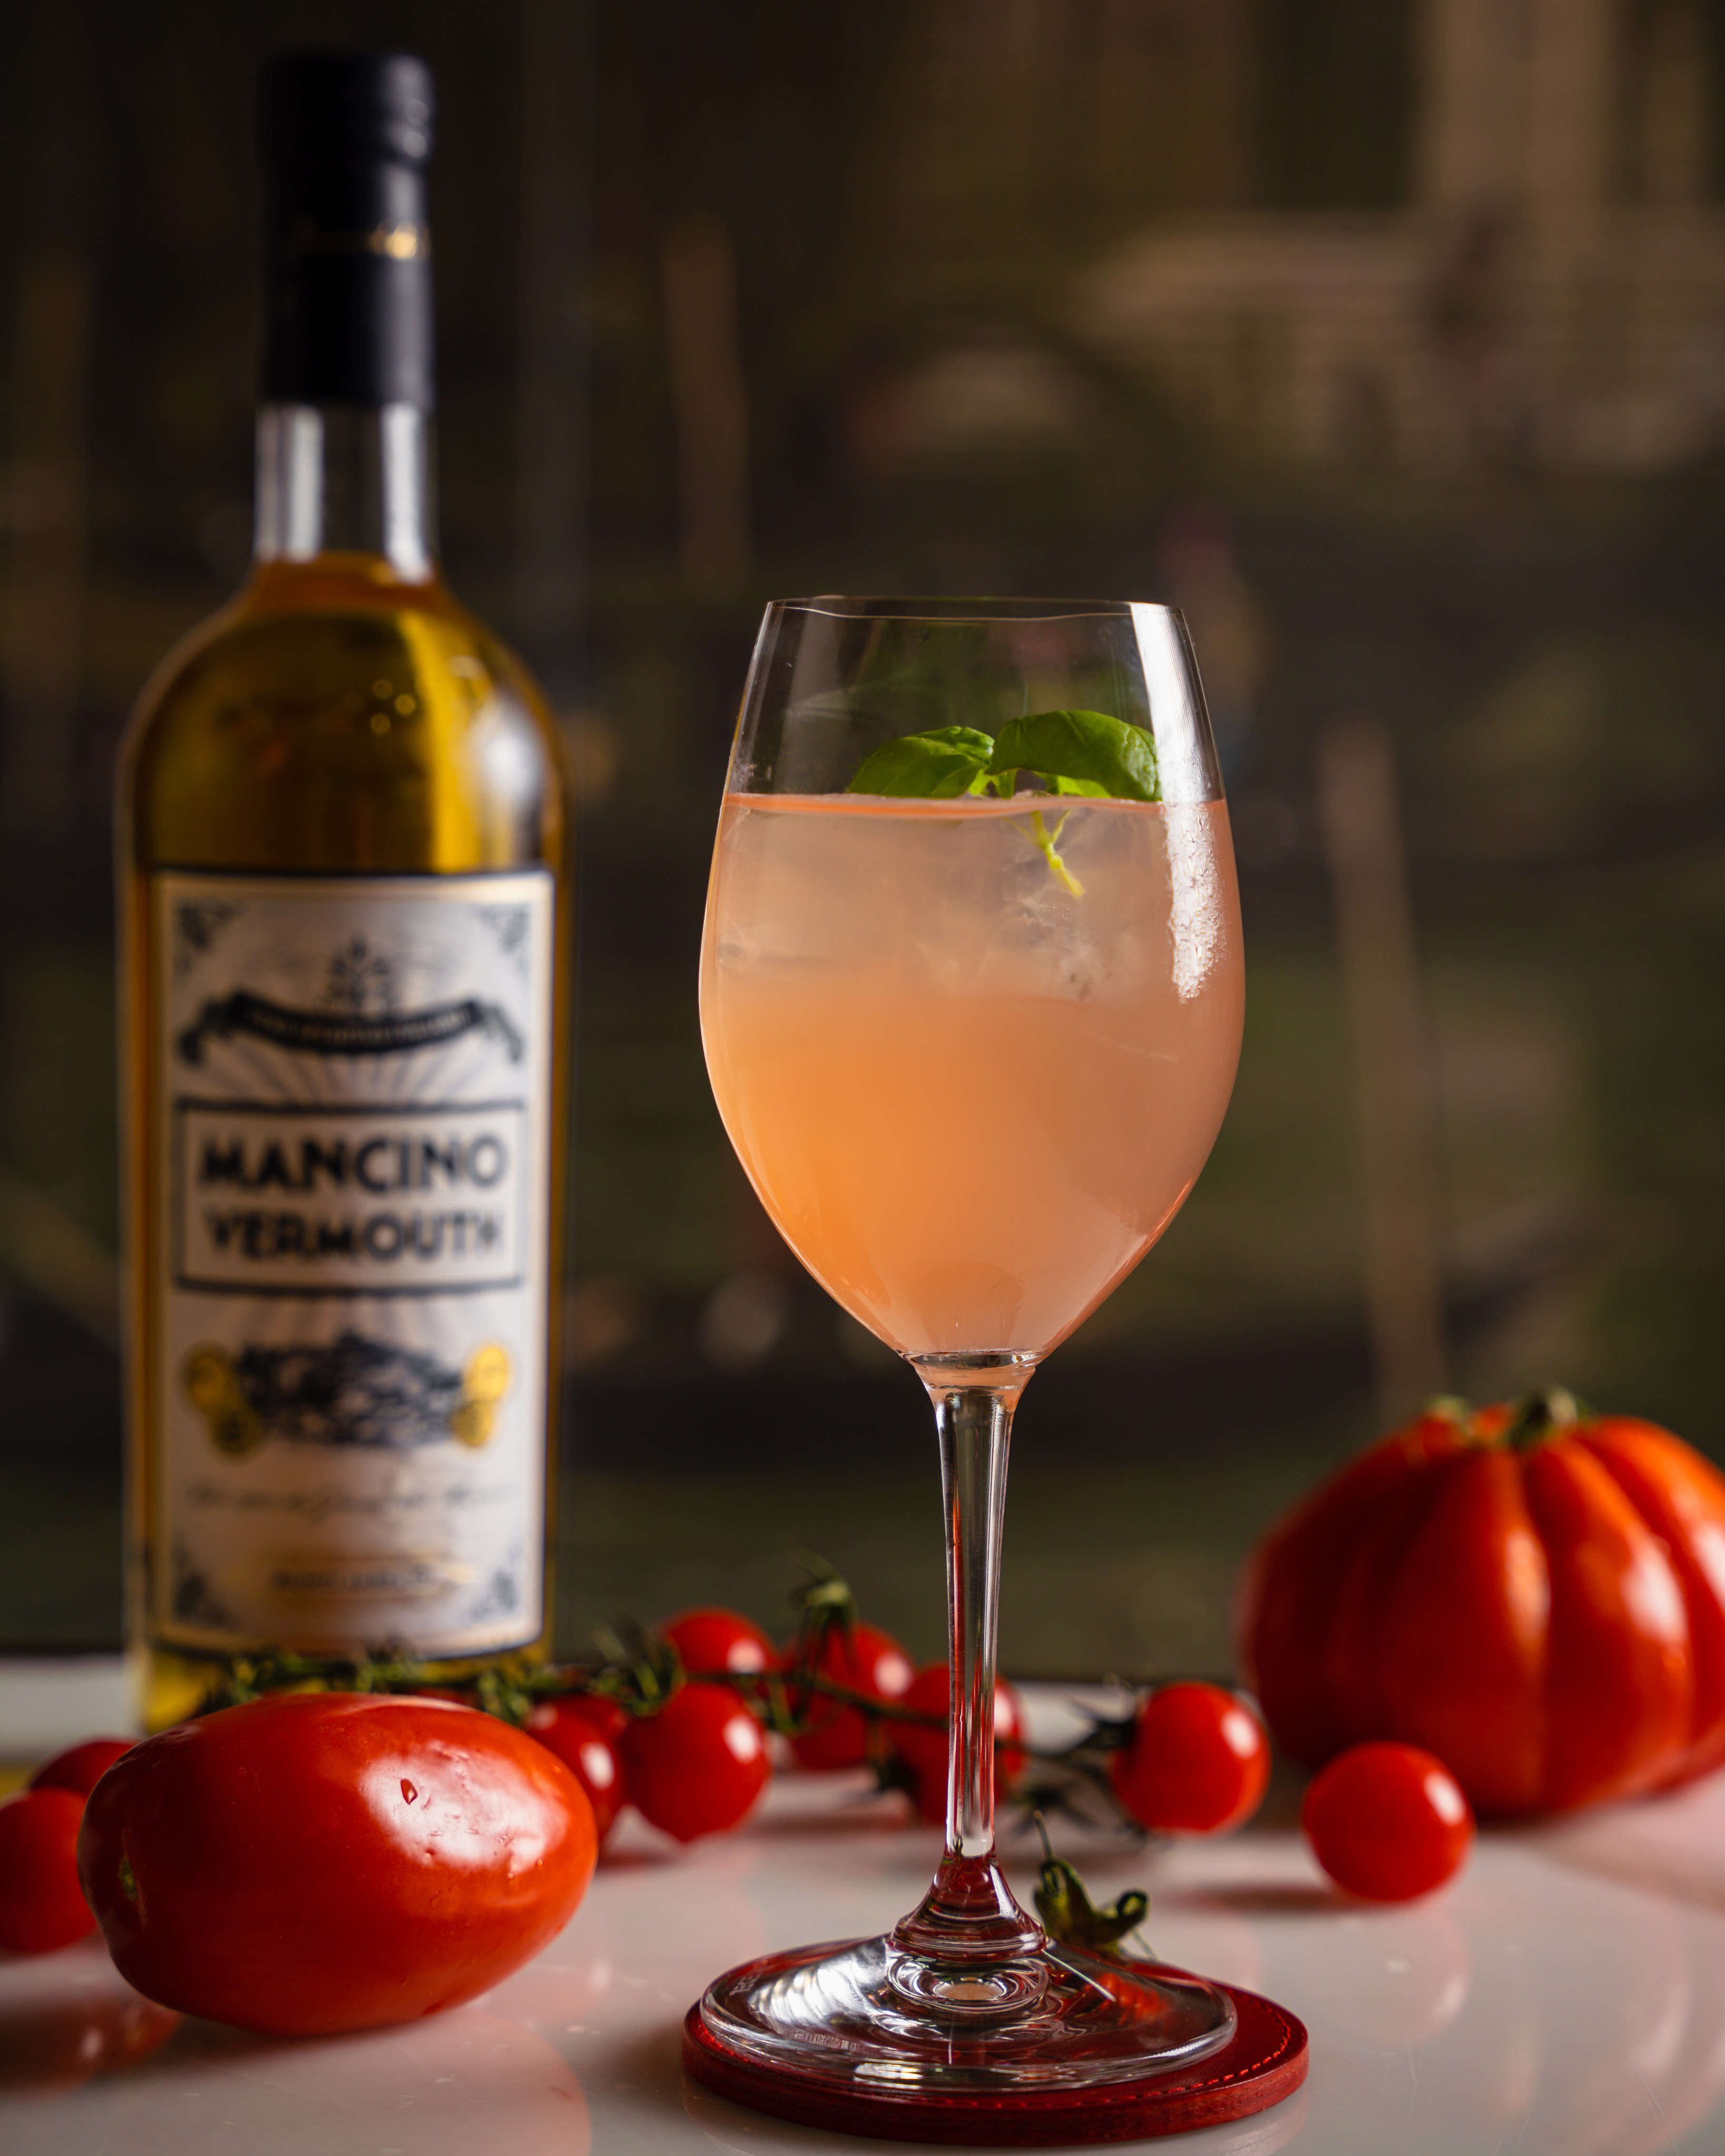 Bianco & Rosso is “the first house of vermouth in Hong Kong”. Photo: Handout